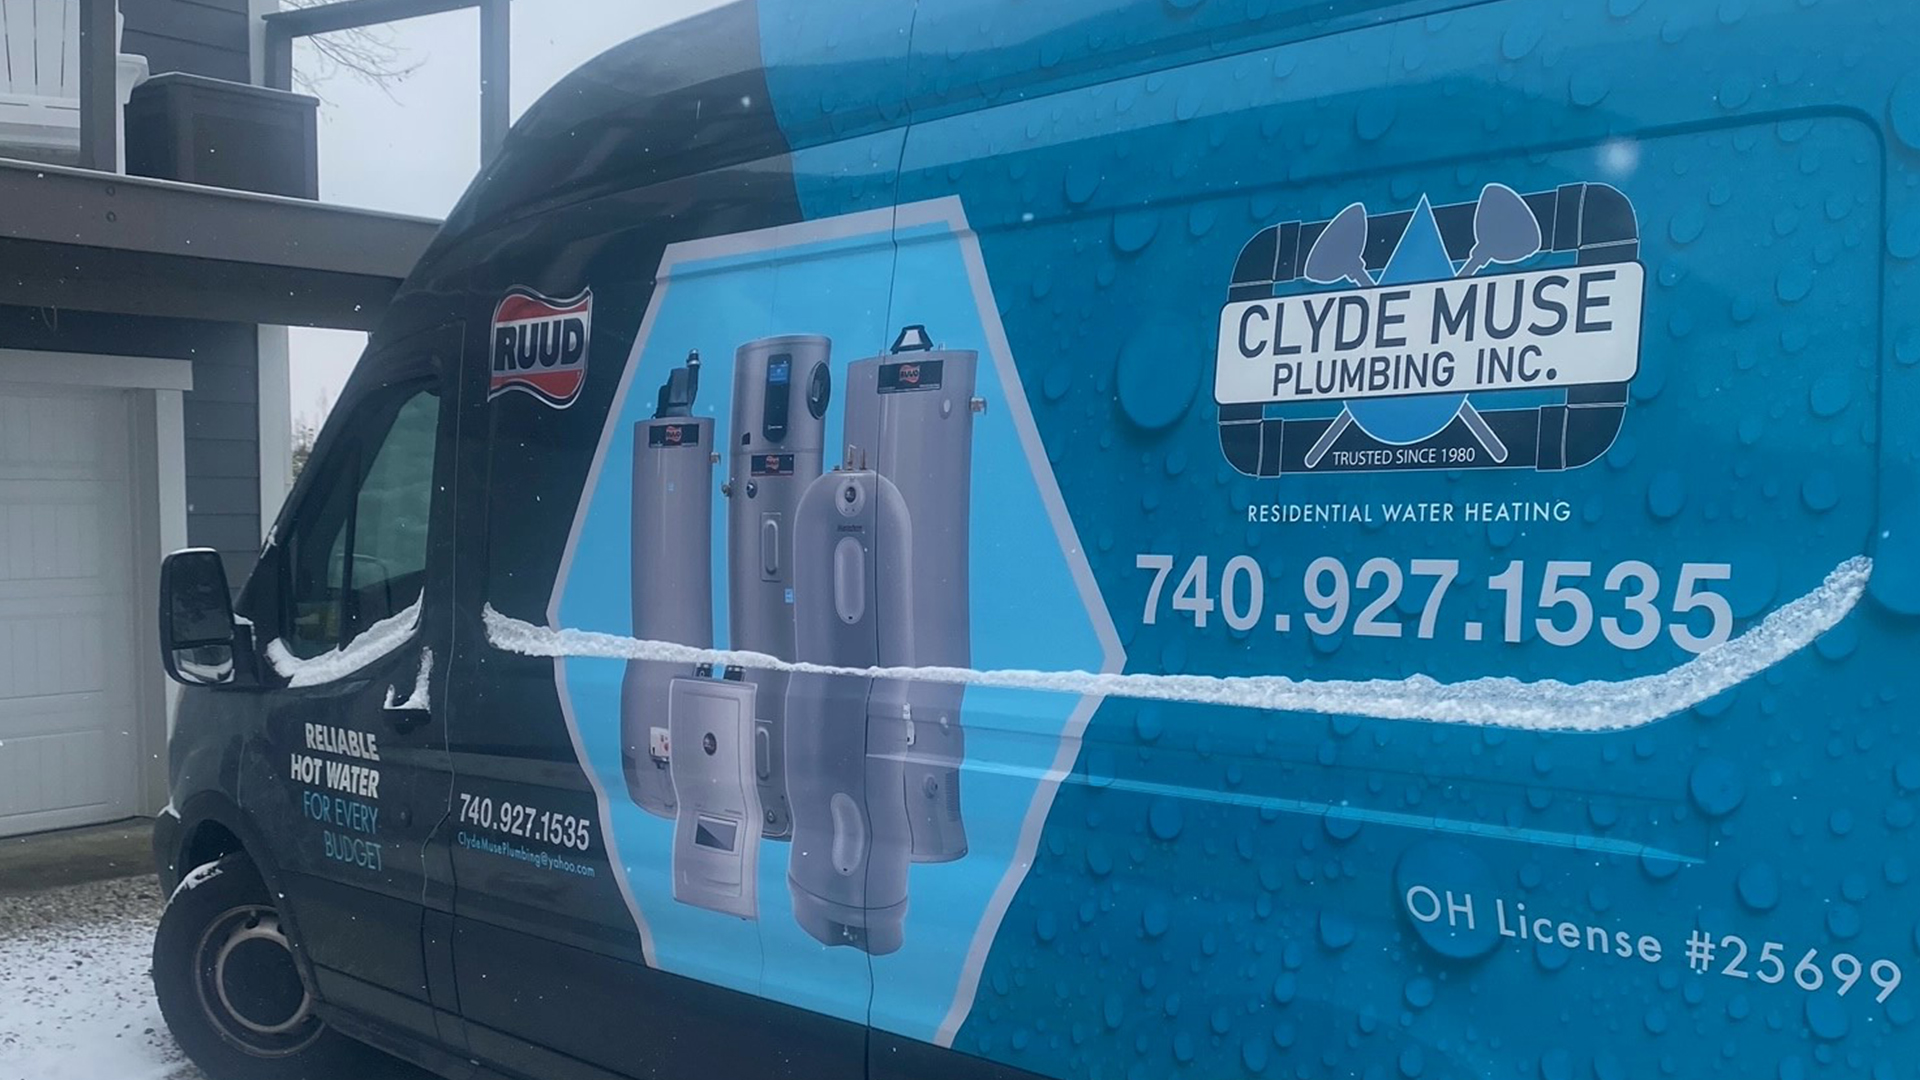 Clyde Muse truck